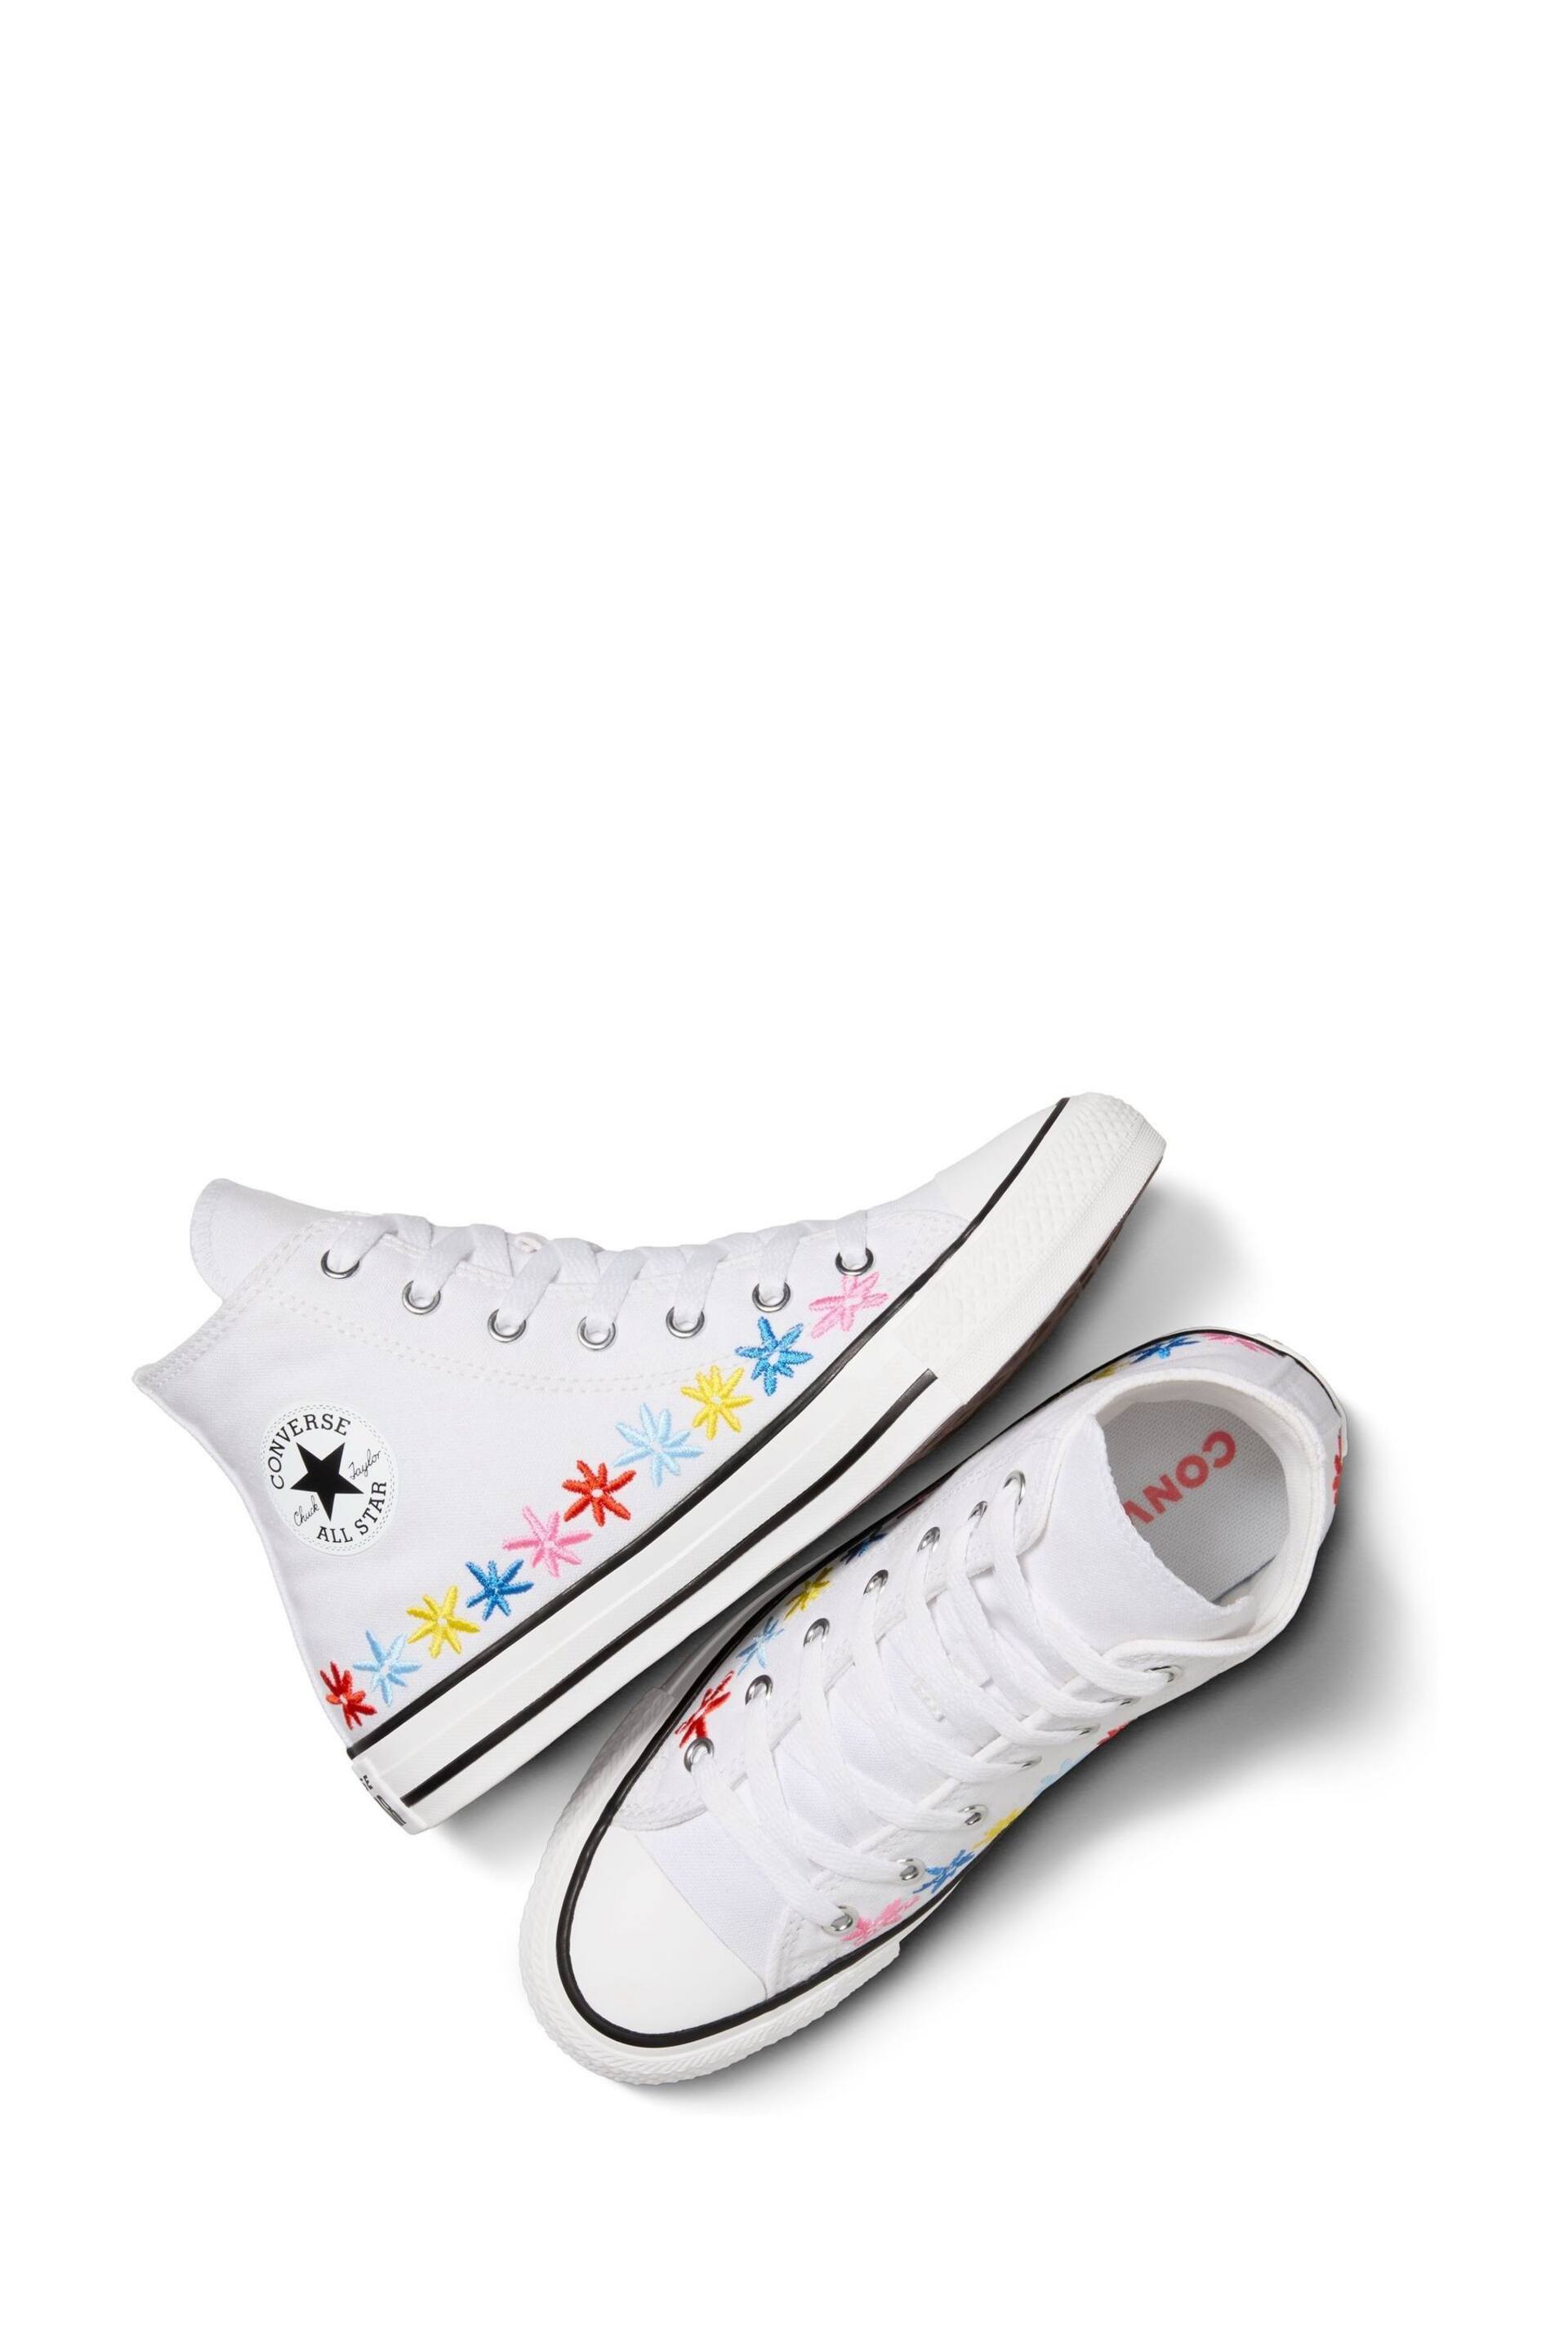 Converse White Embroidered Chuck Taylor All Star Youth Trainers - Image 9 of 9